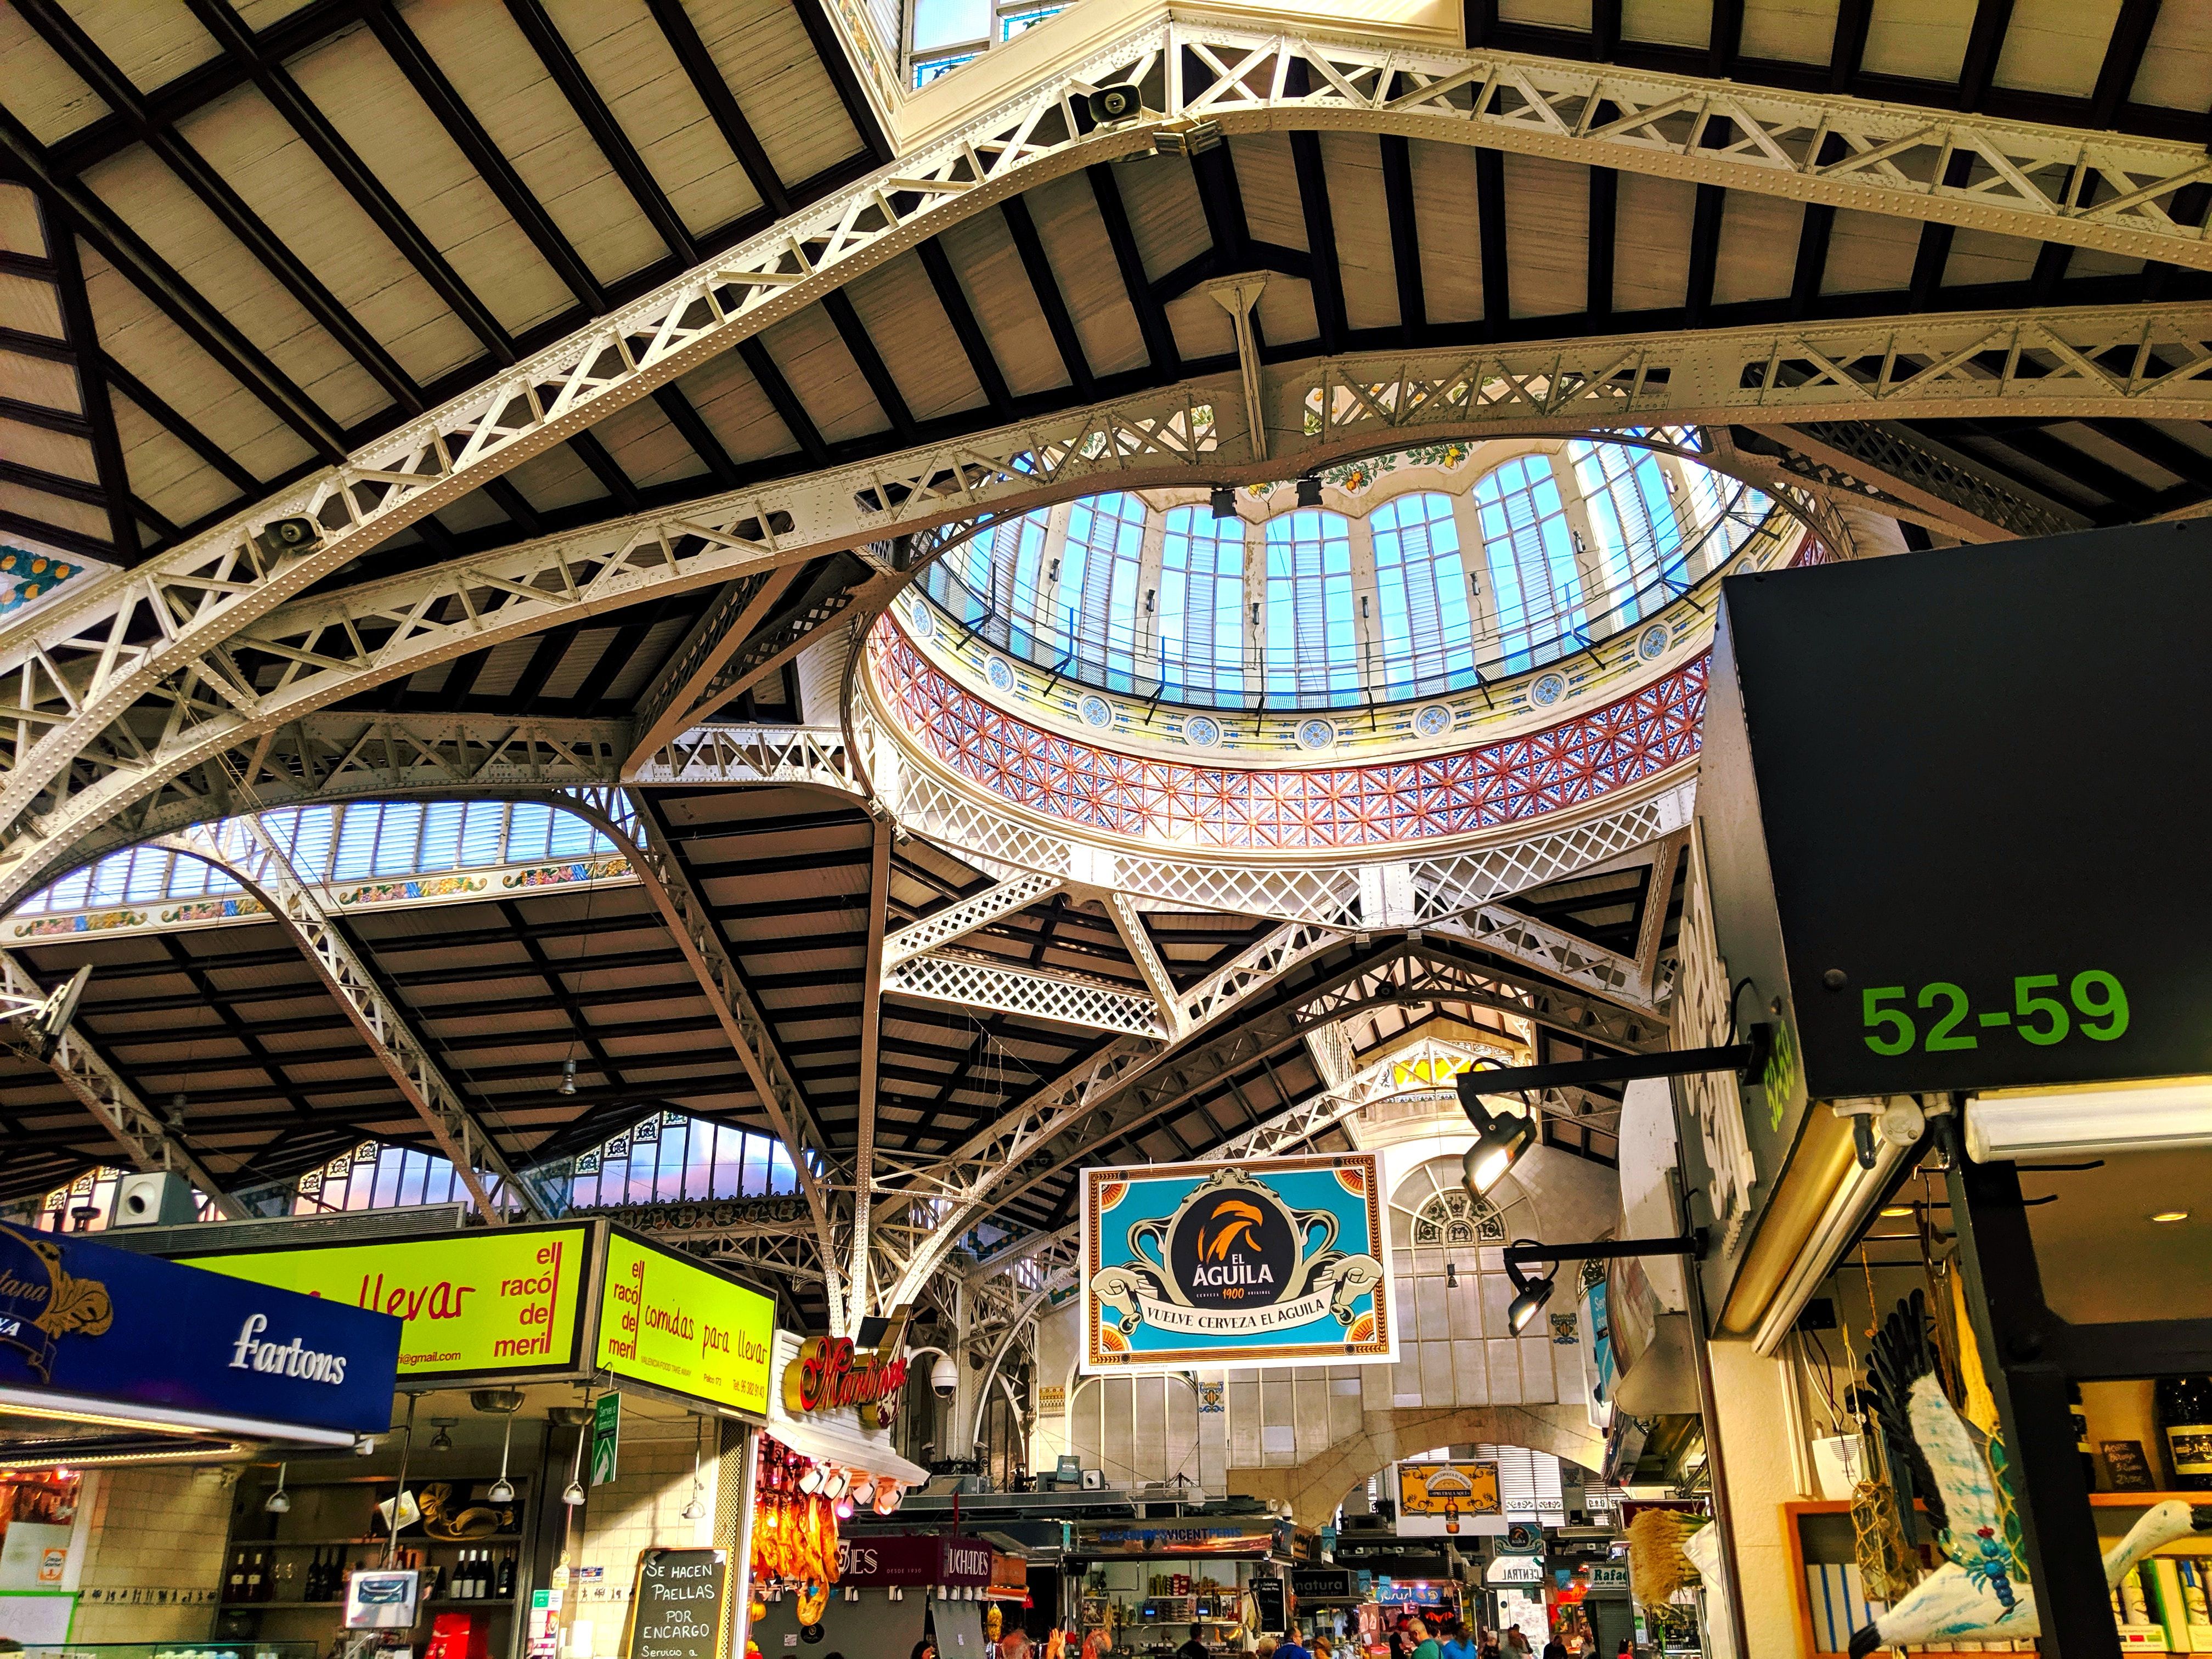 The ceiling of the Central Market of Valencia Spain